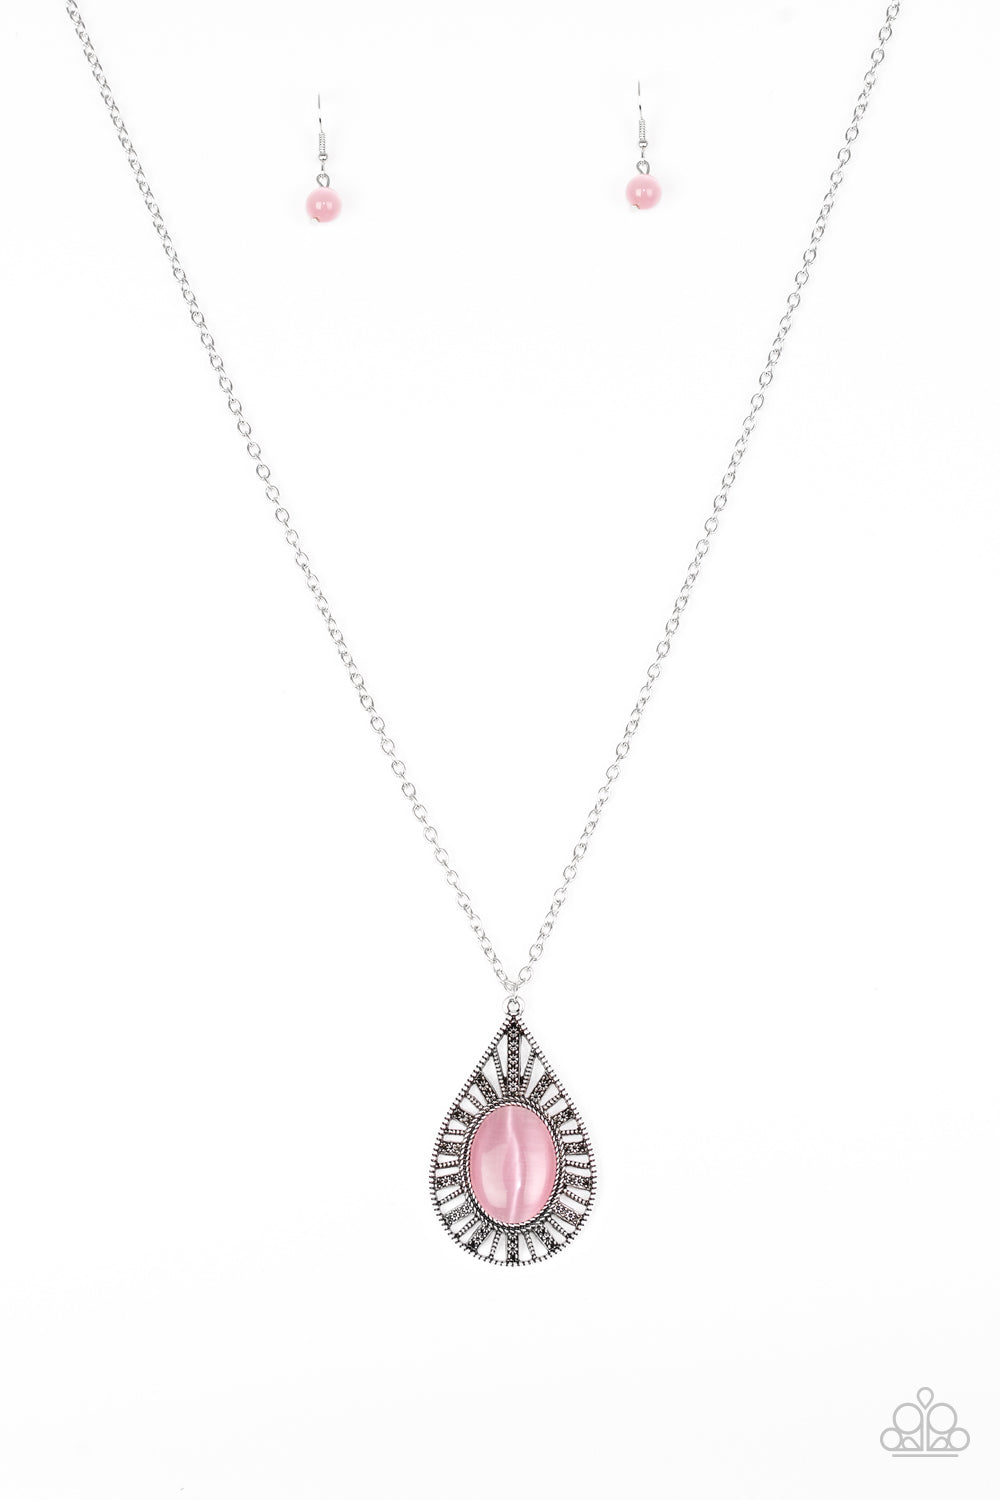 Paparazzi Necklaces - Total Tranquility - Pink